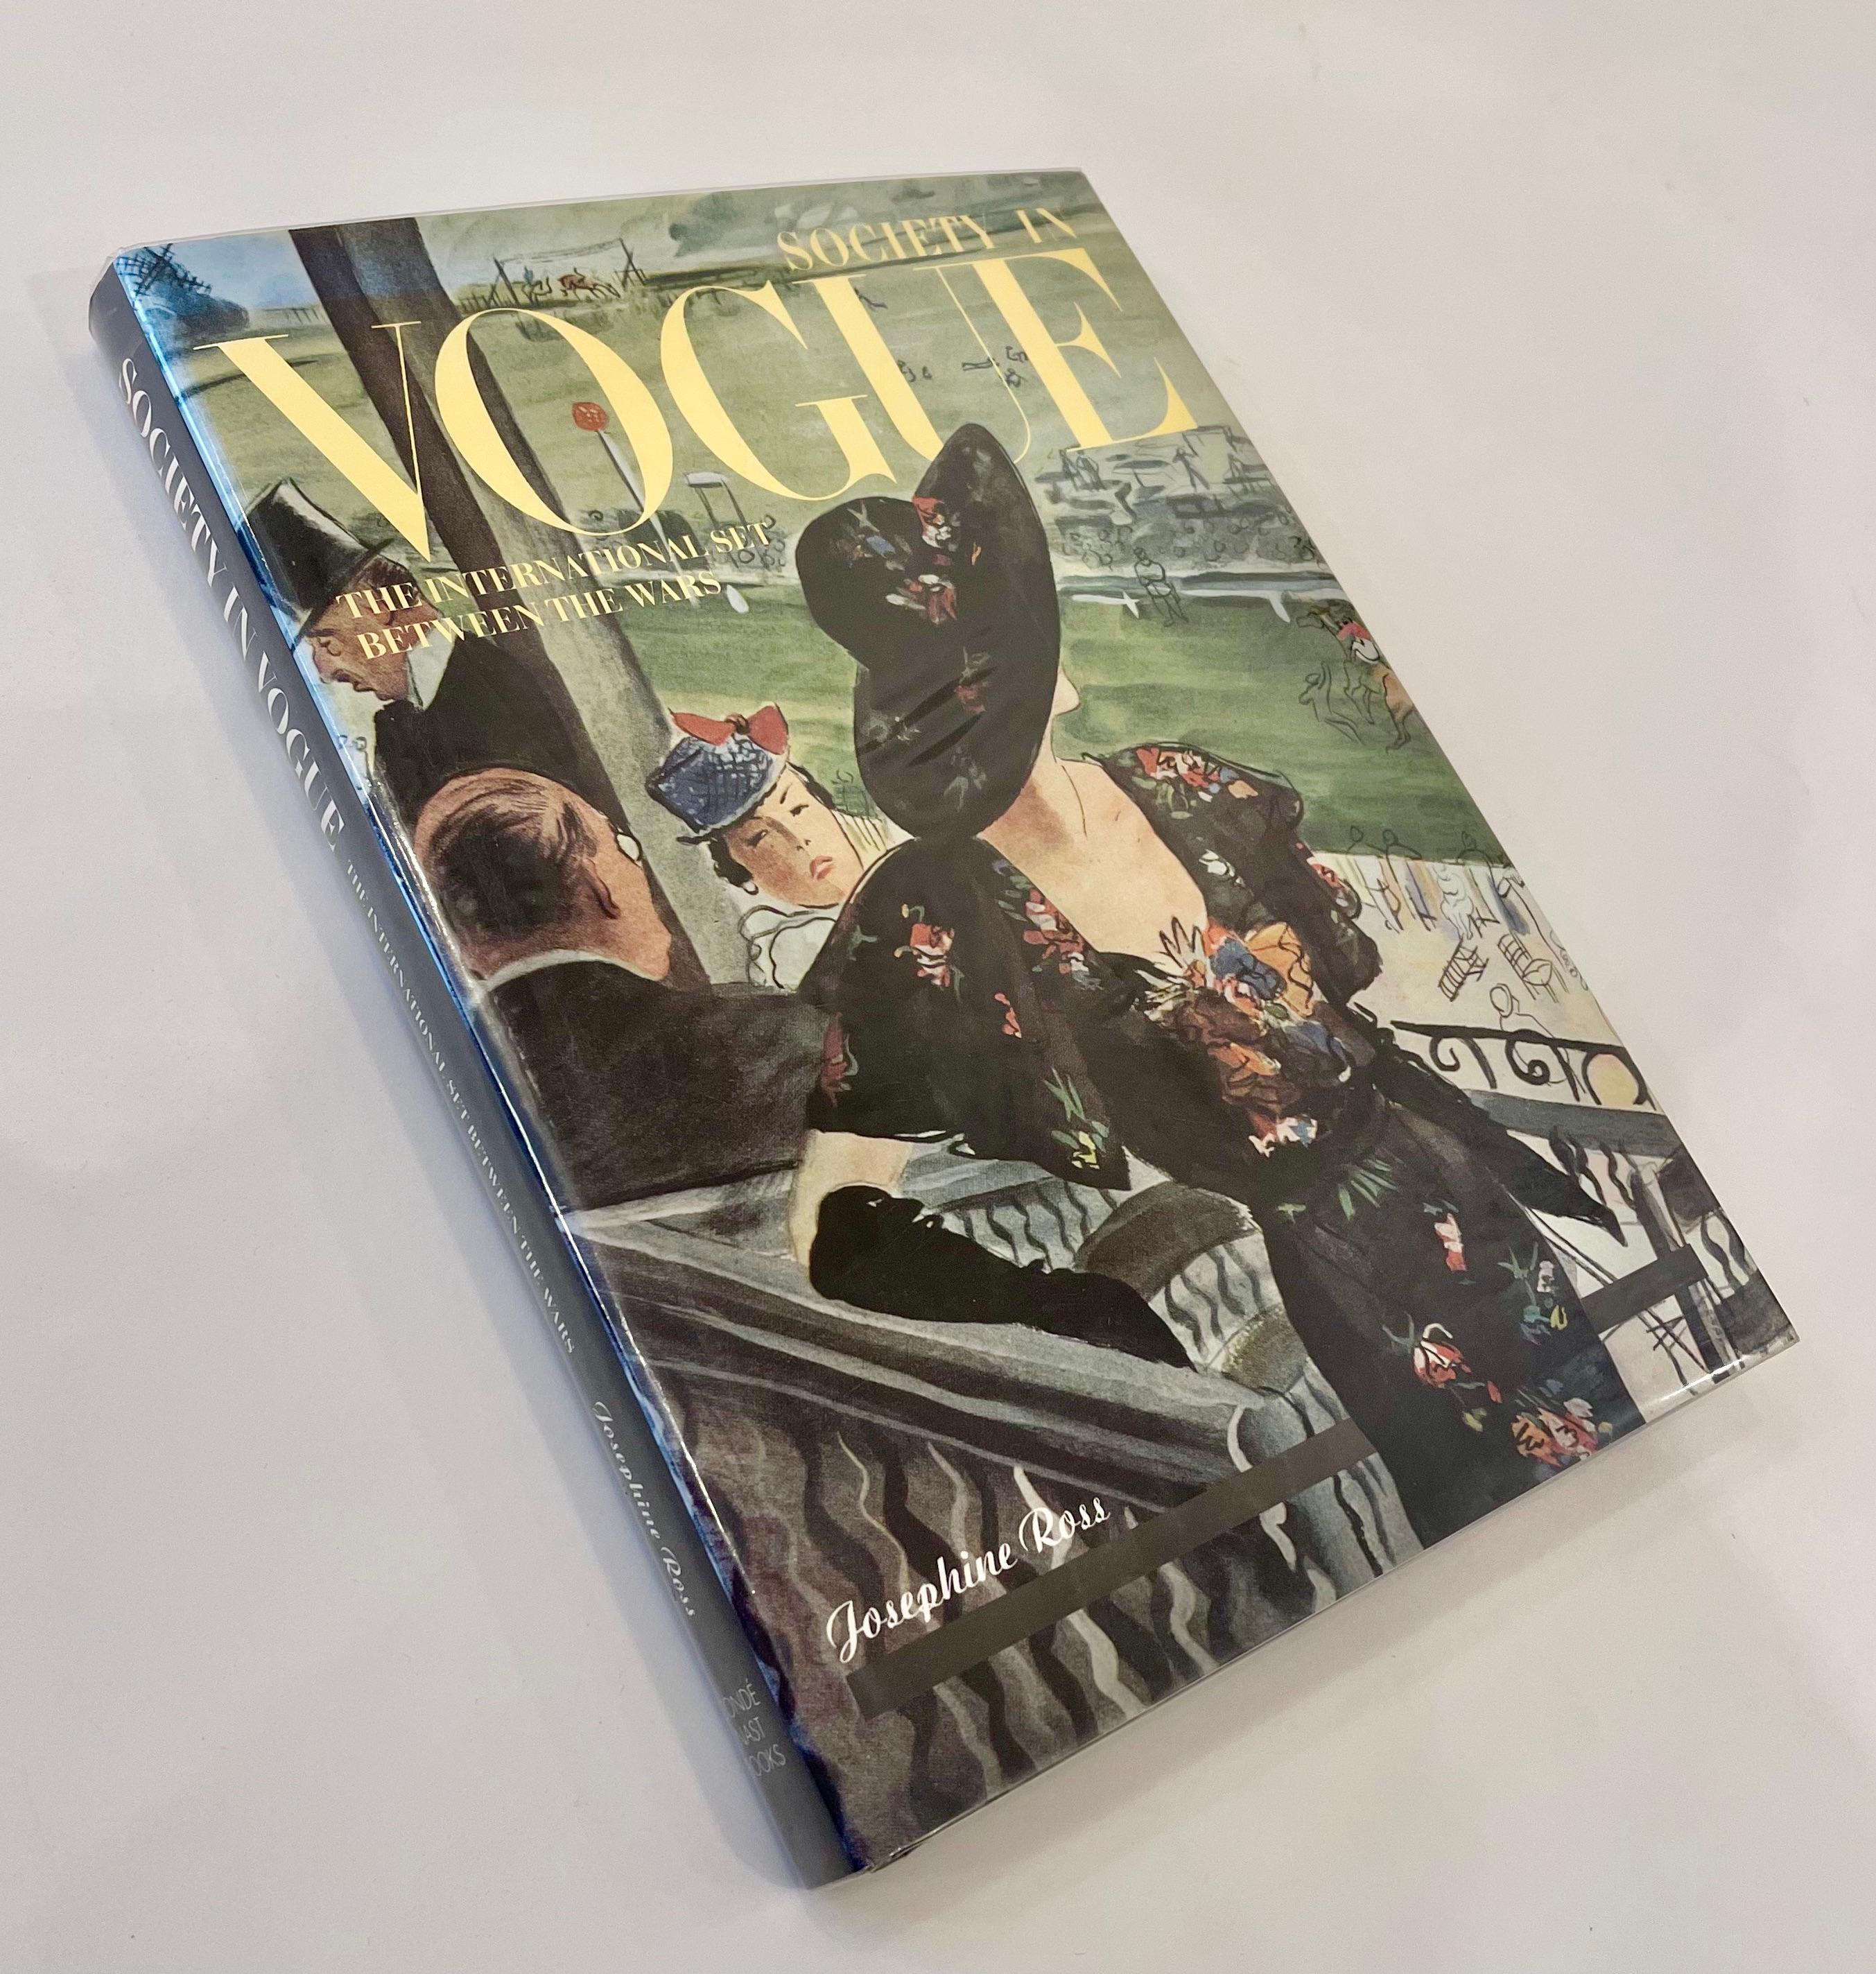 Society in Vogue: The International Set Between the Wars - Josephine Ross, 1992 9